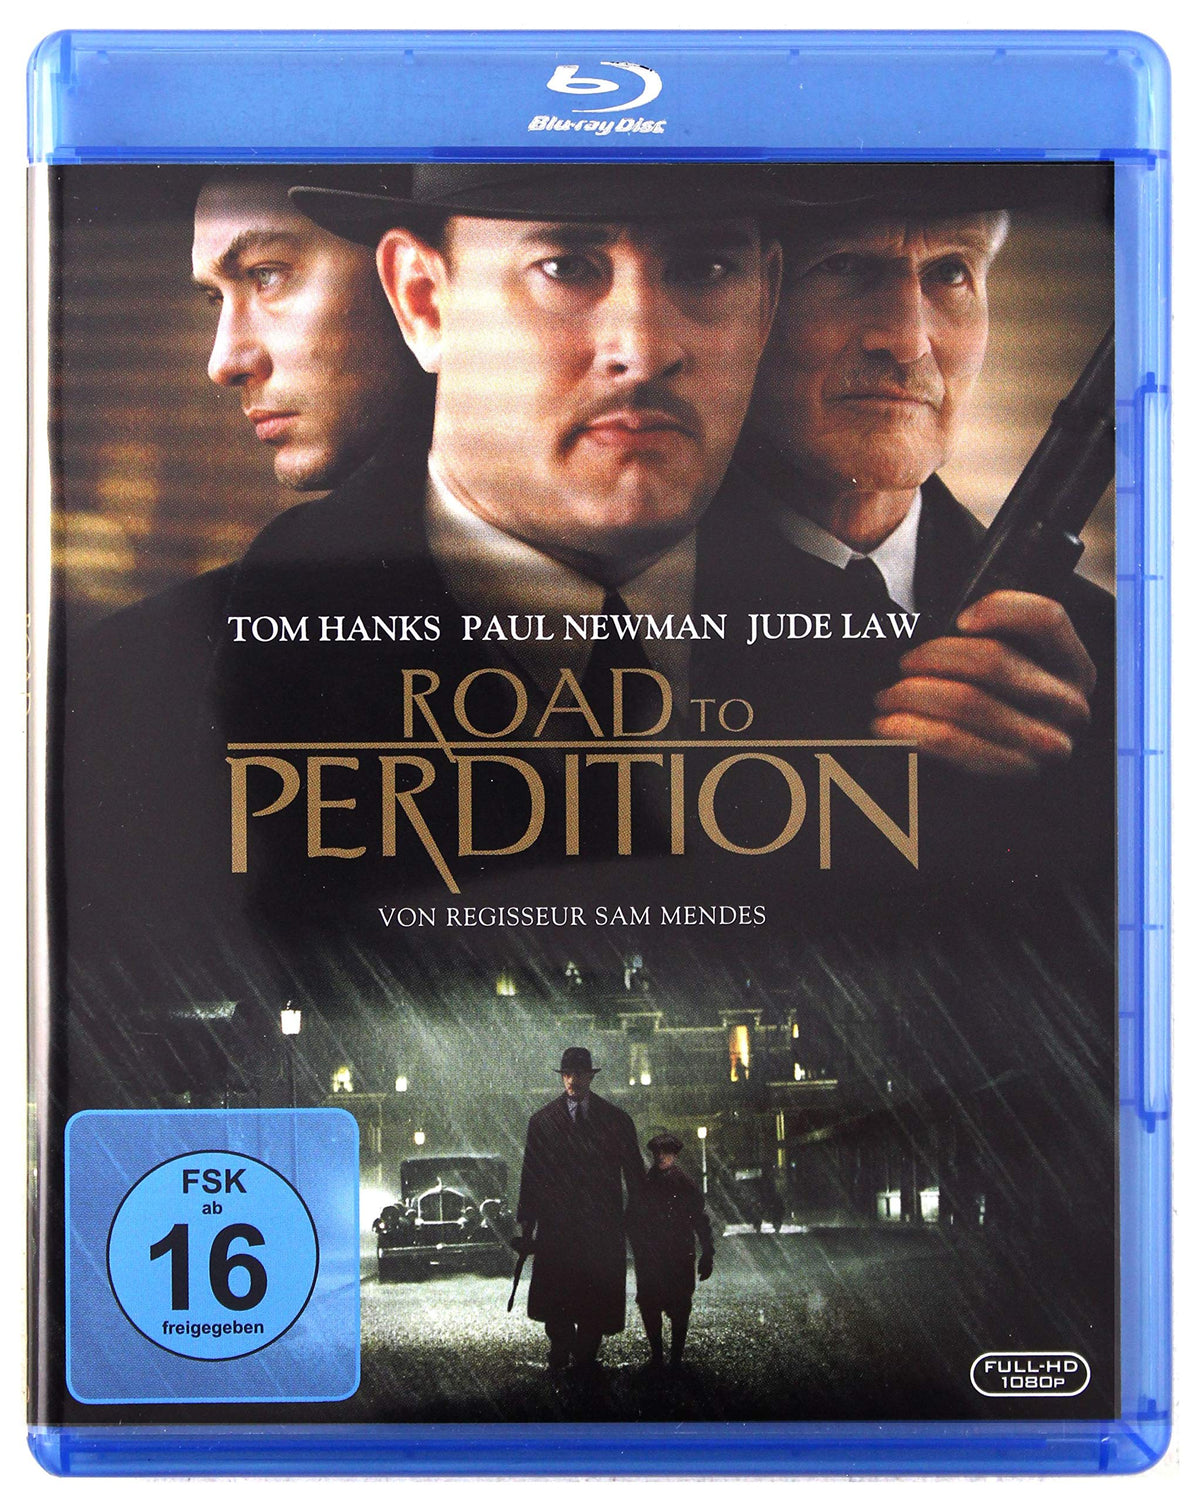 ROAD TO PERDITION (BLU-RAY) -